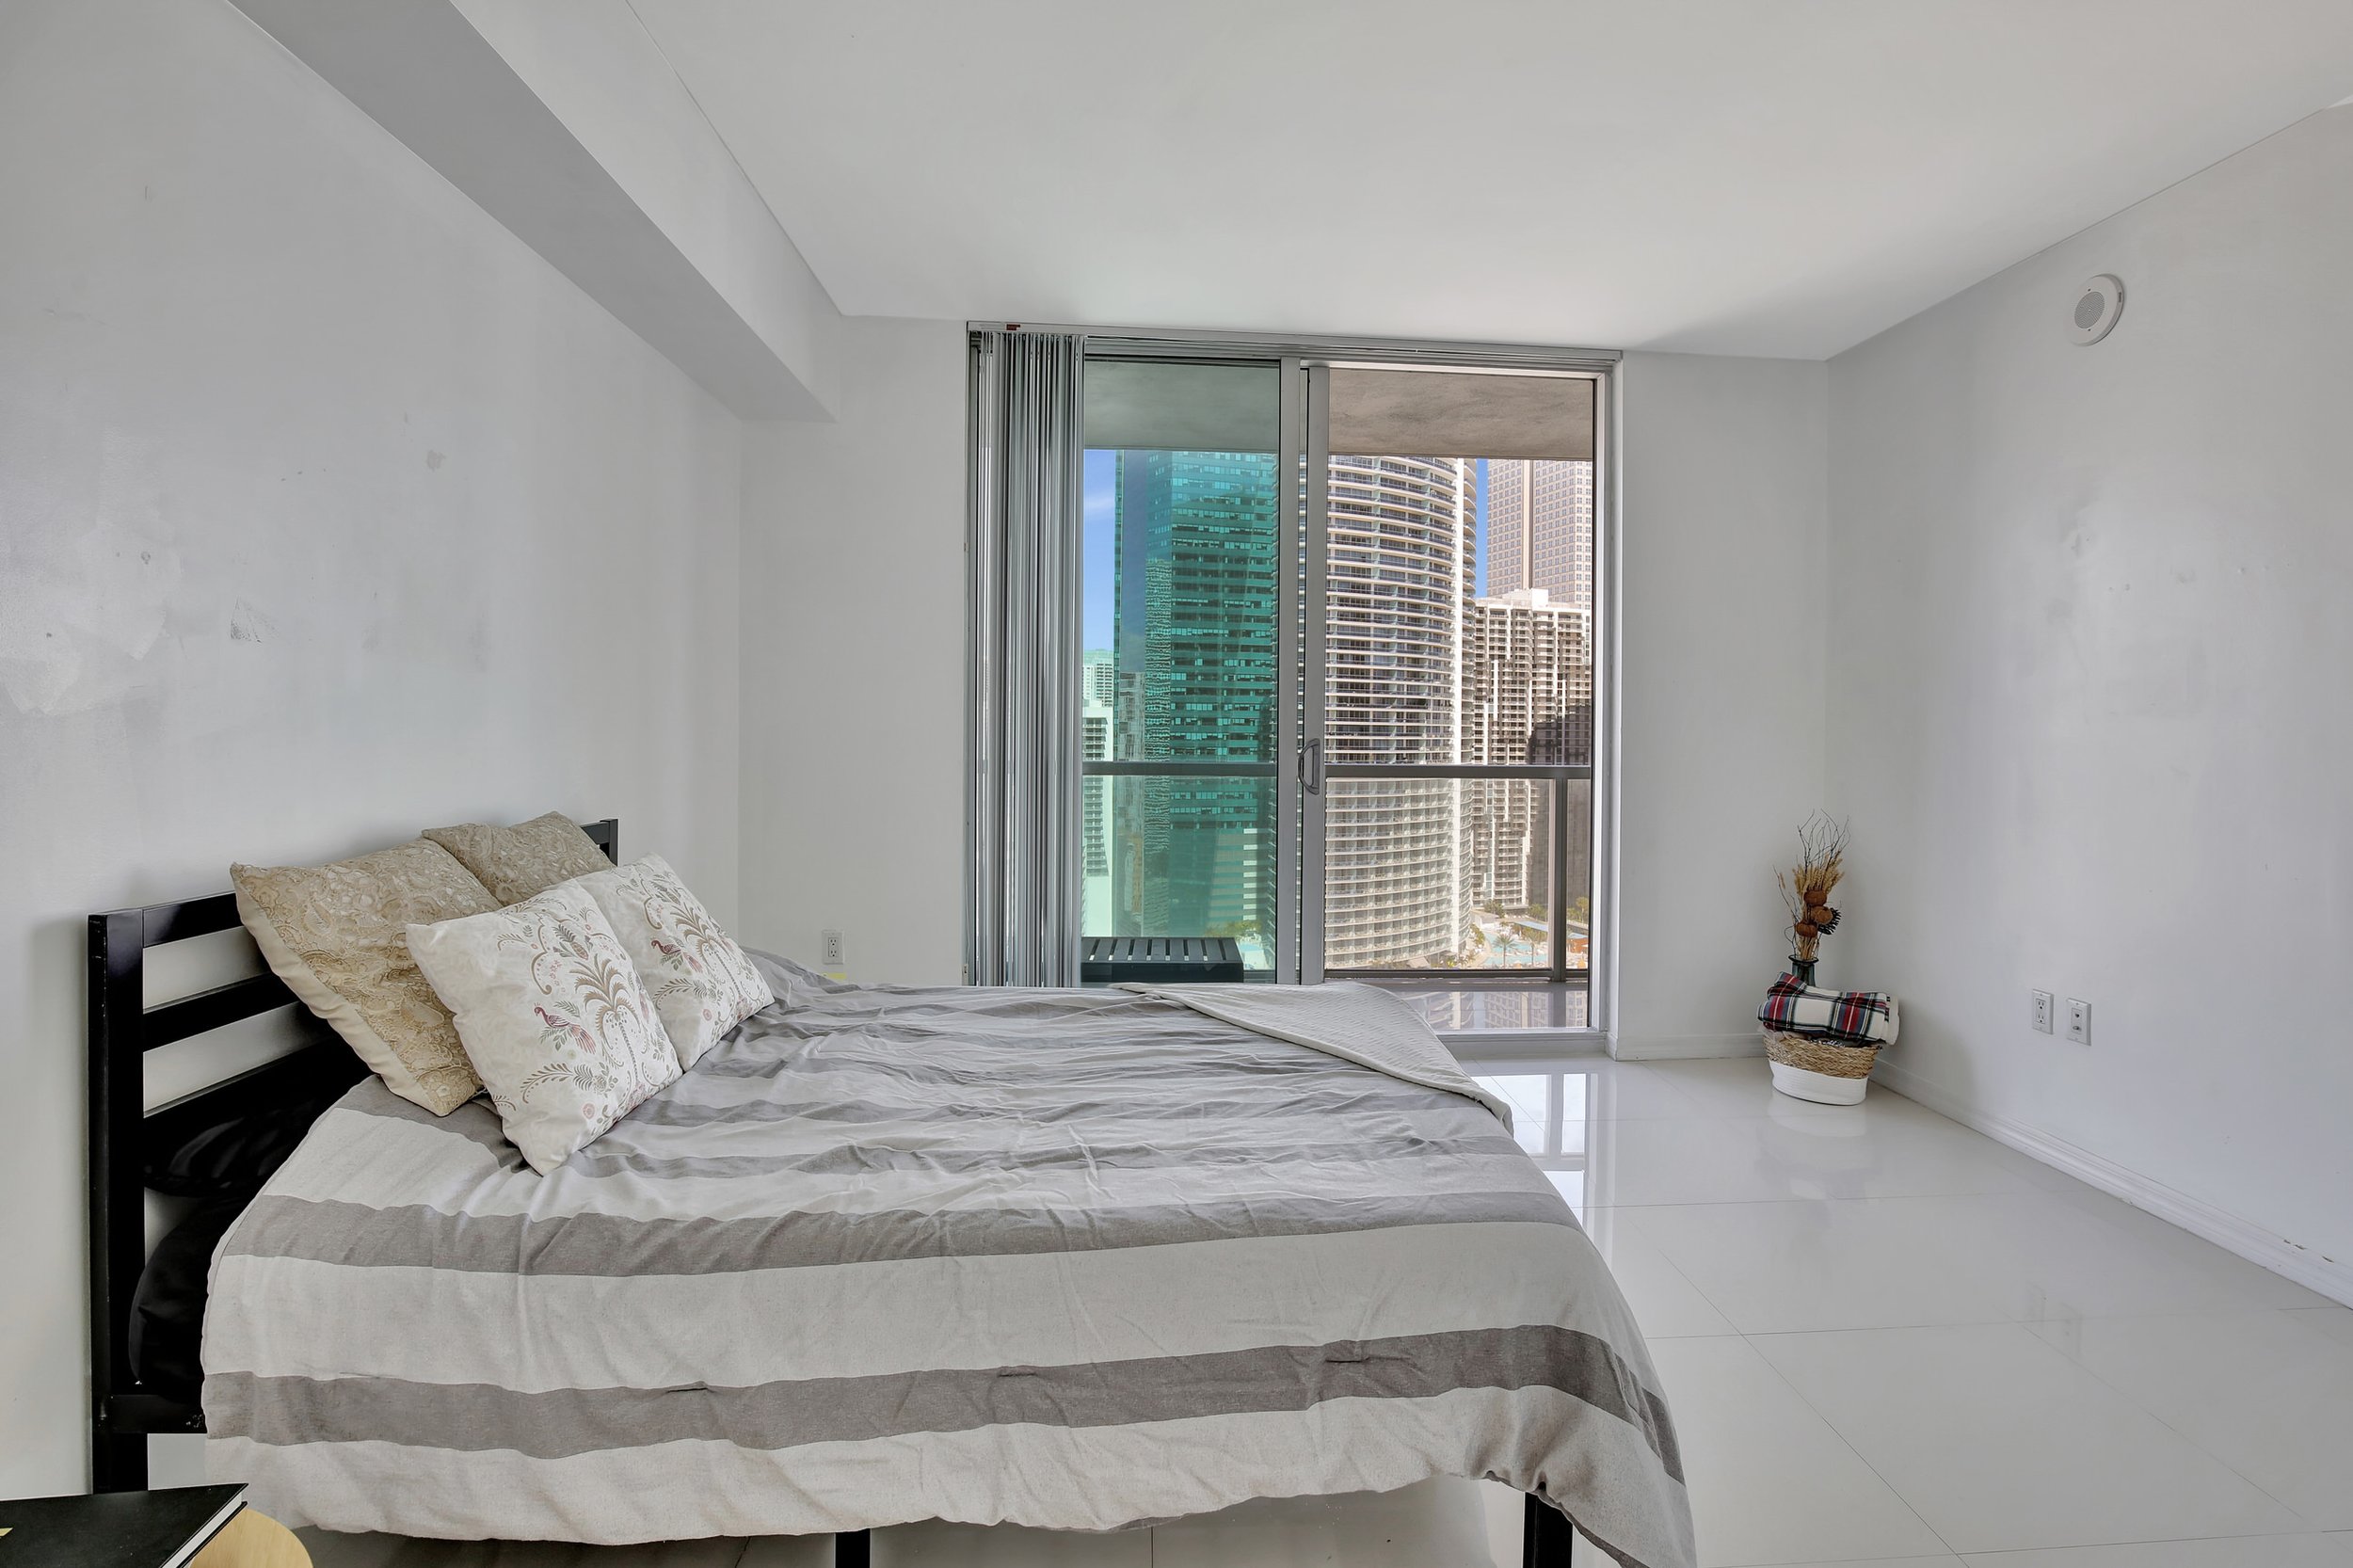 Check Out This Two-Bedroom Condo For Under $900K In Brickell 2.jpg